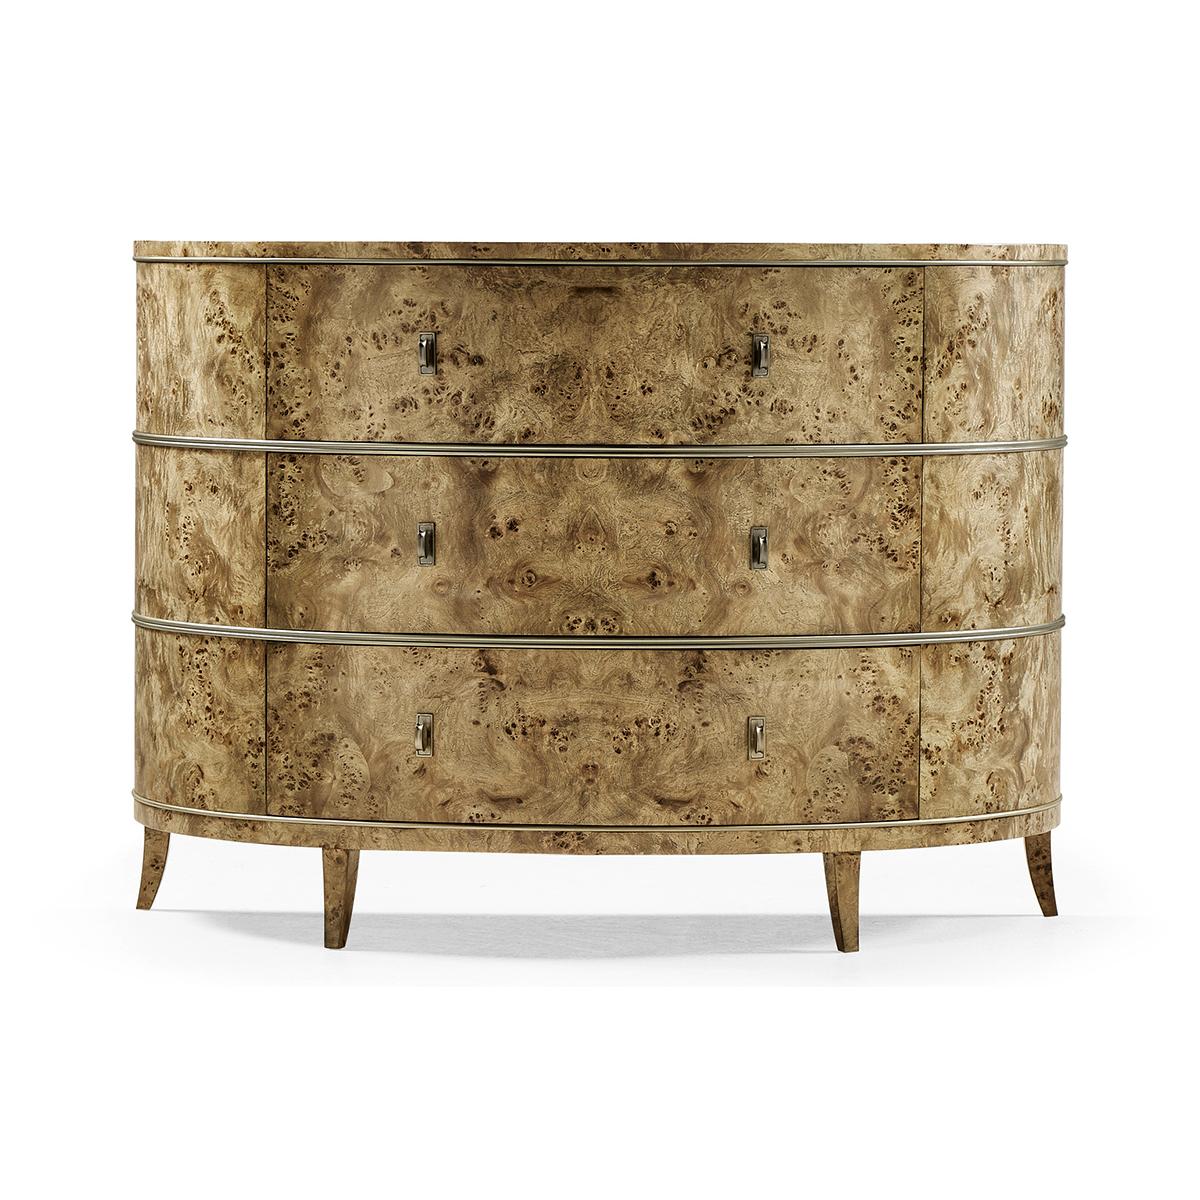 Modern French Burl Demi Lune Dresser, constructed of hardwood and ash burl veneer under a light, transparent lacquer finish. The brass hardware is acid-dipped and hand-rubbed to achieve a rich, natural patina.

With three long central drawers and